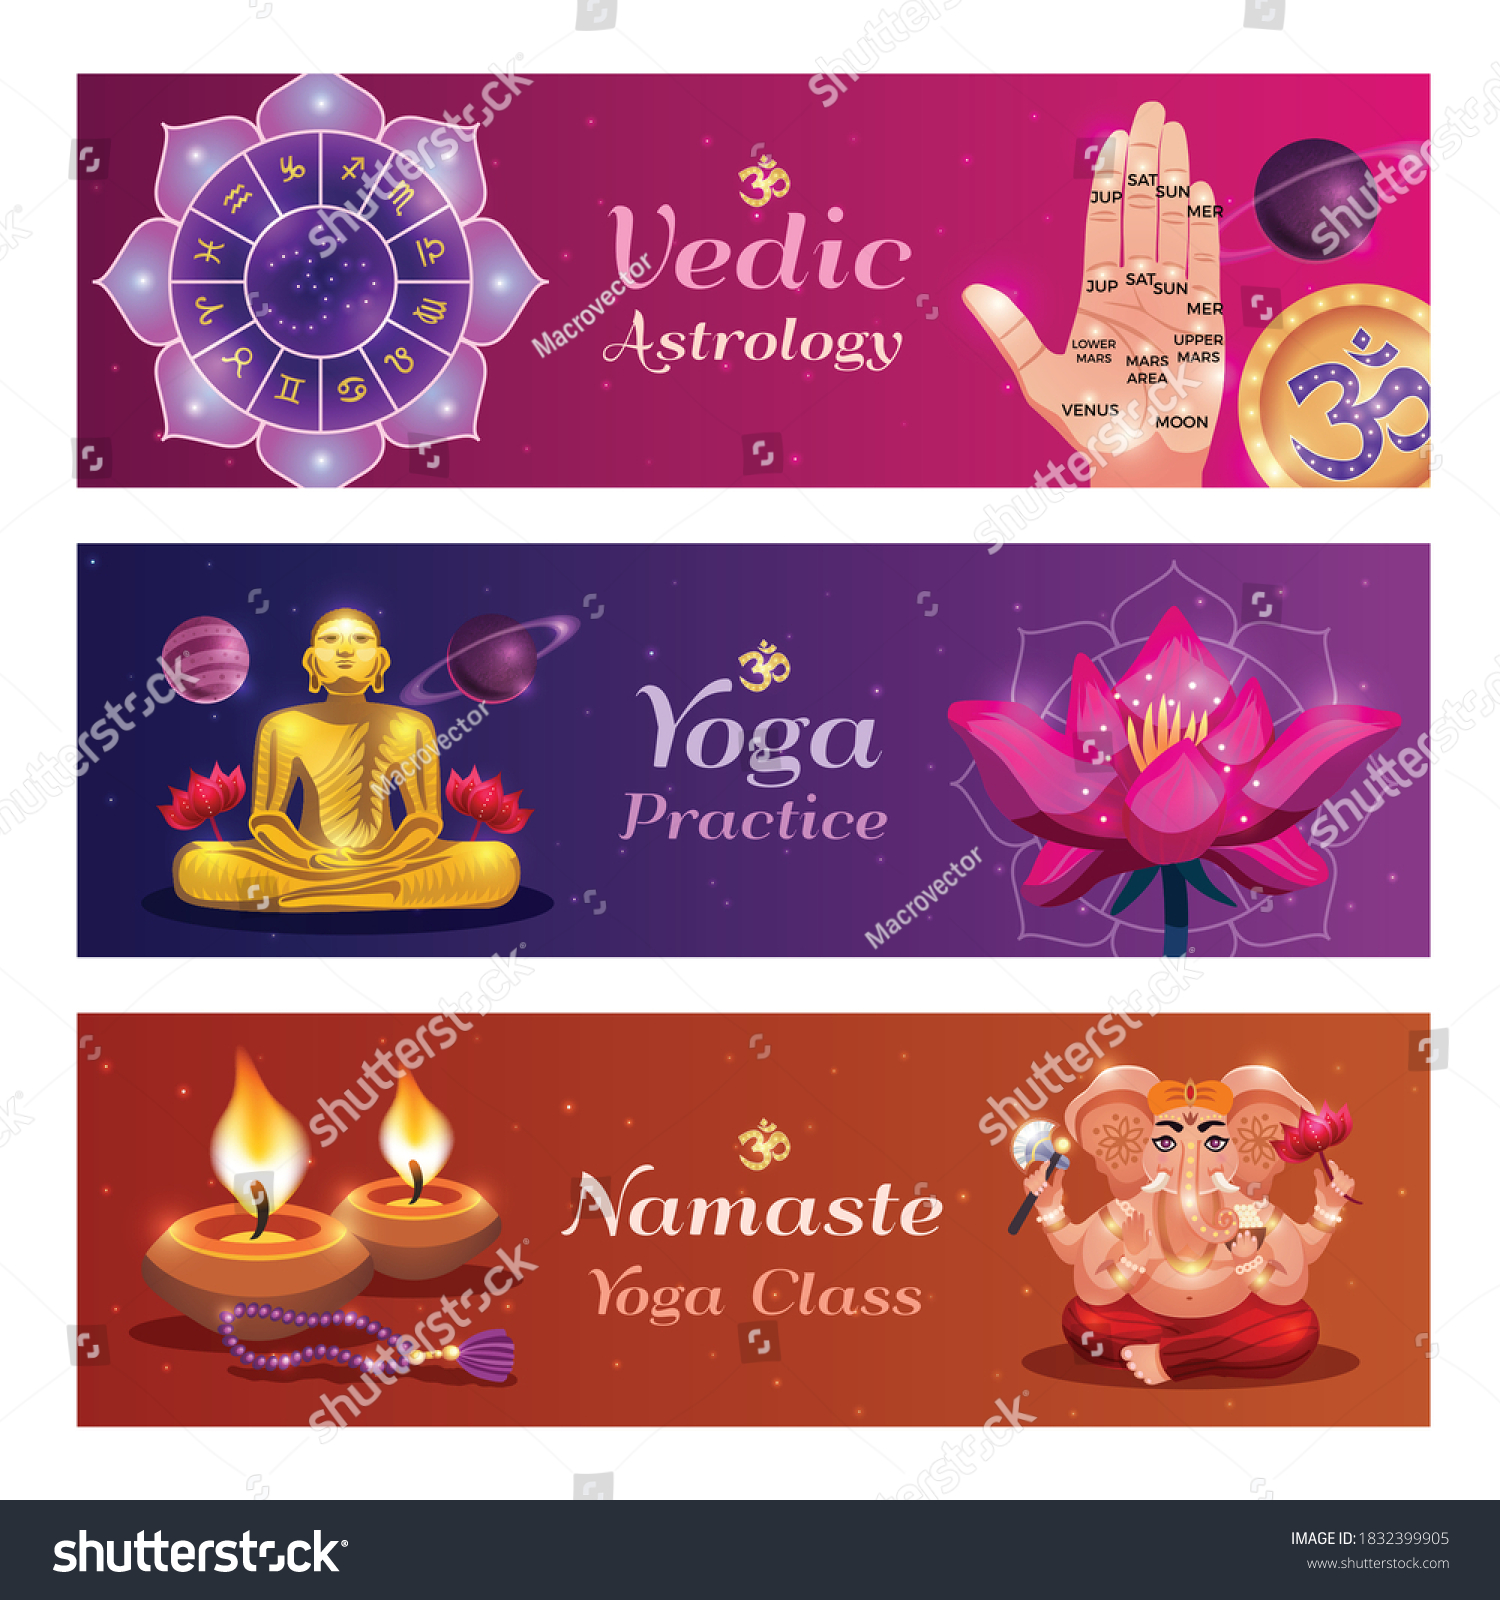 SVG of Yoga namaste 3 horizontal colorful background vedic astrology banners with lotus candles hand palm reading vector illustration  svg